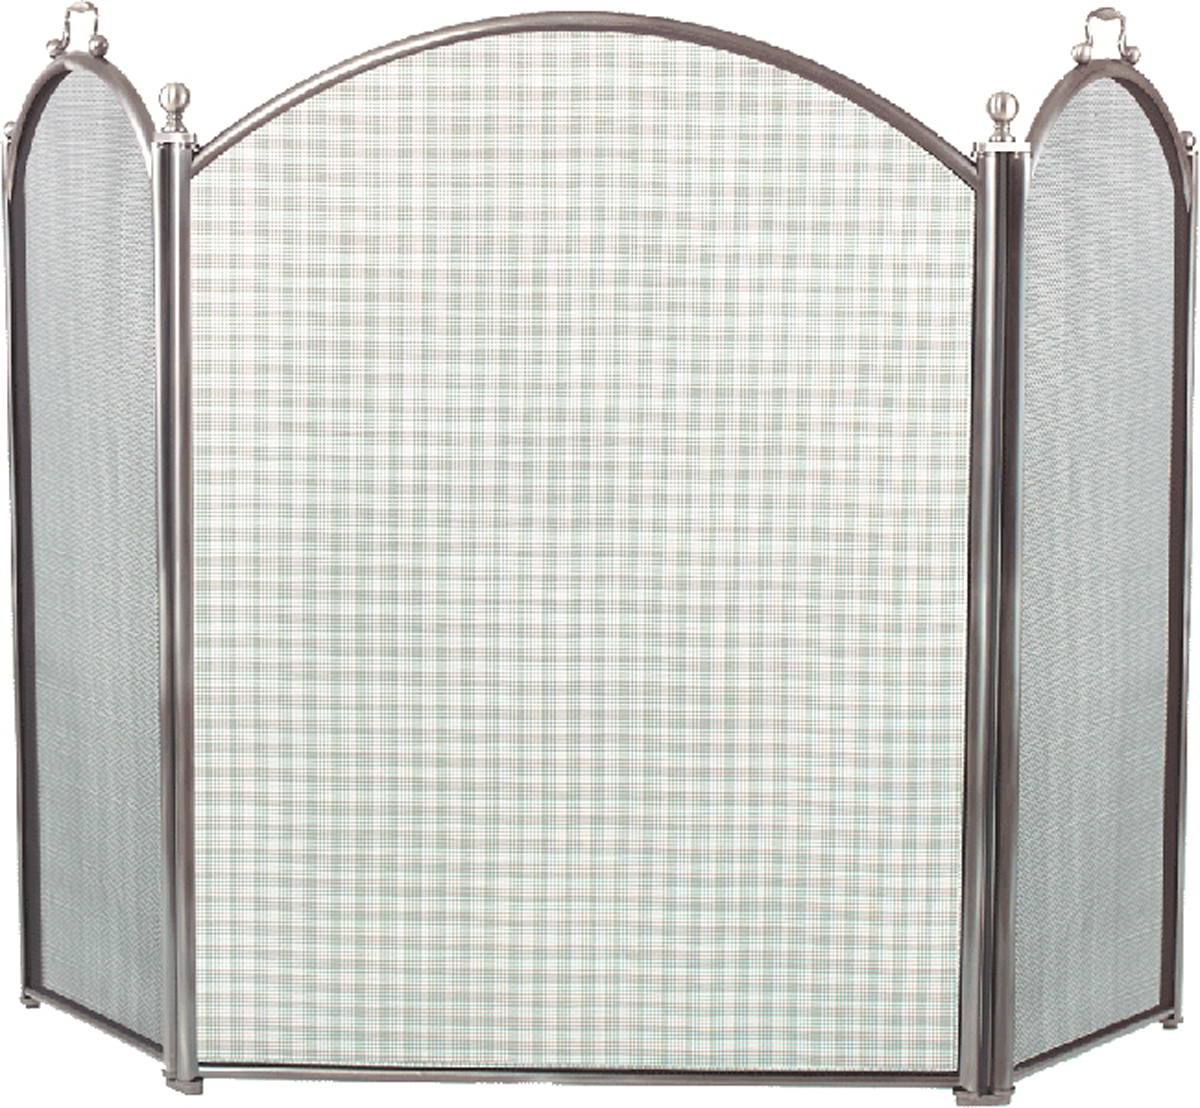 3 fold arched pewter screen product image